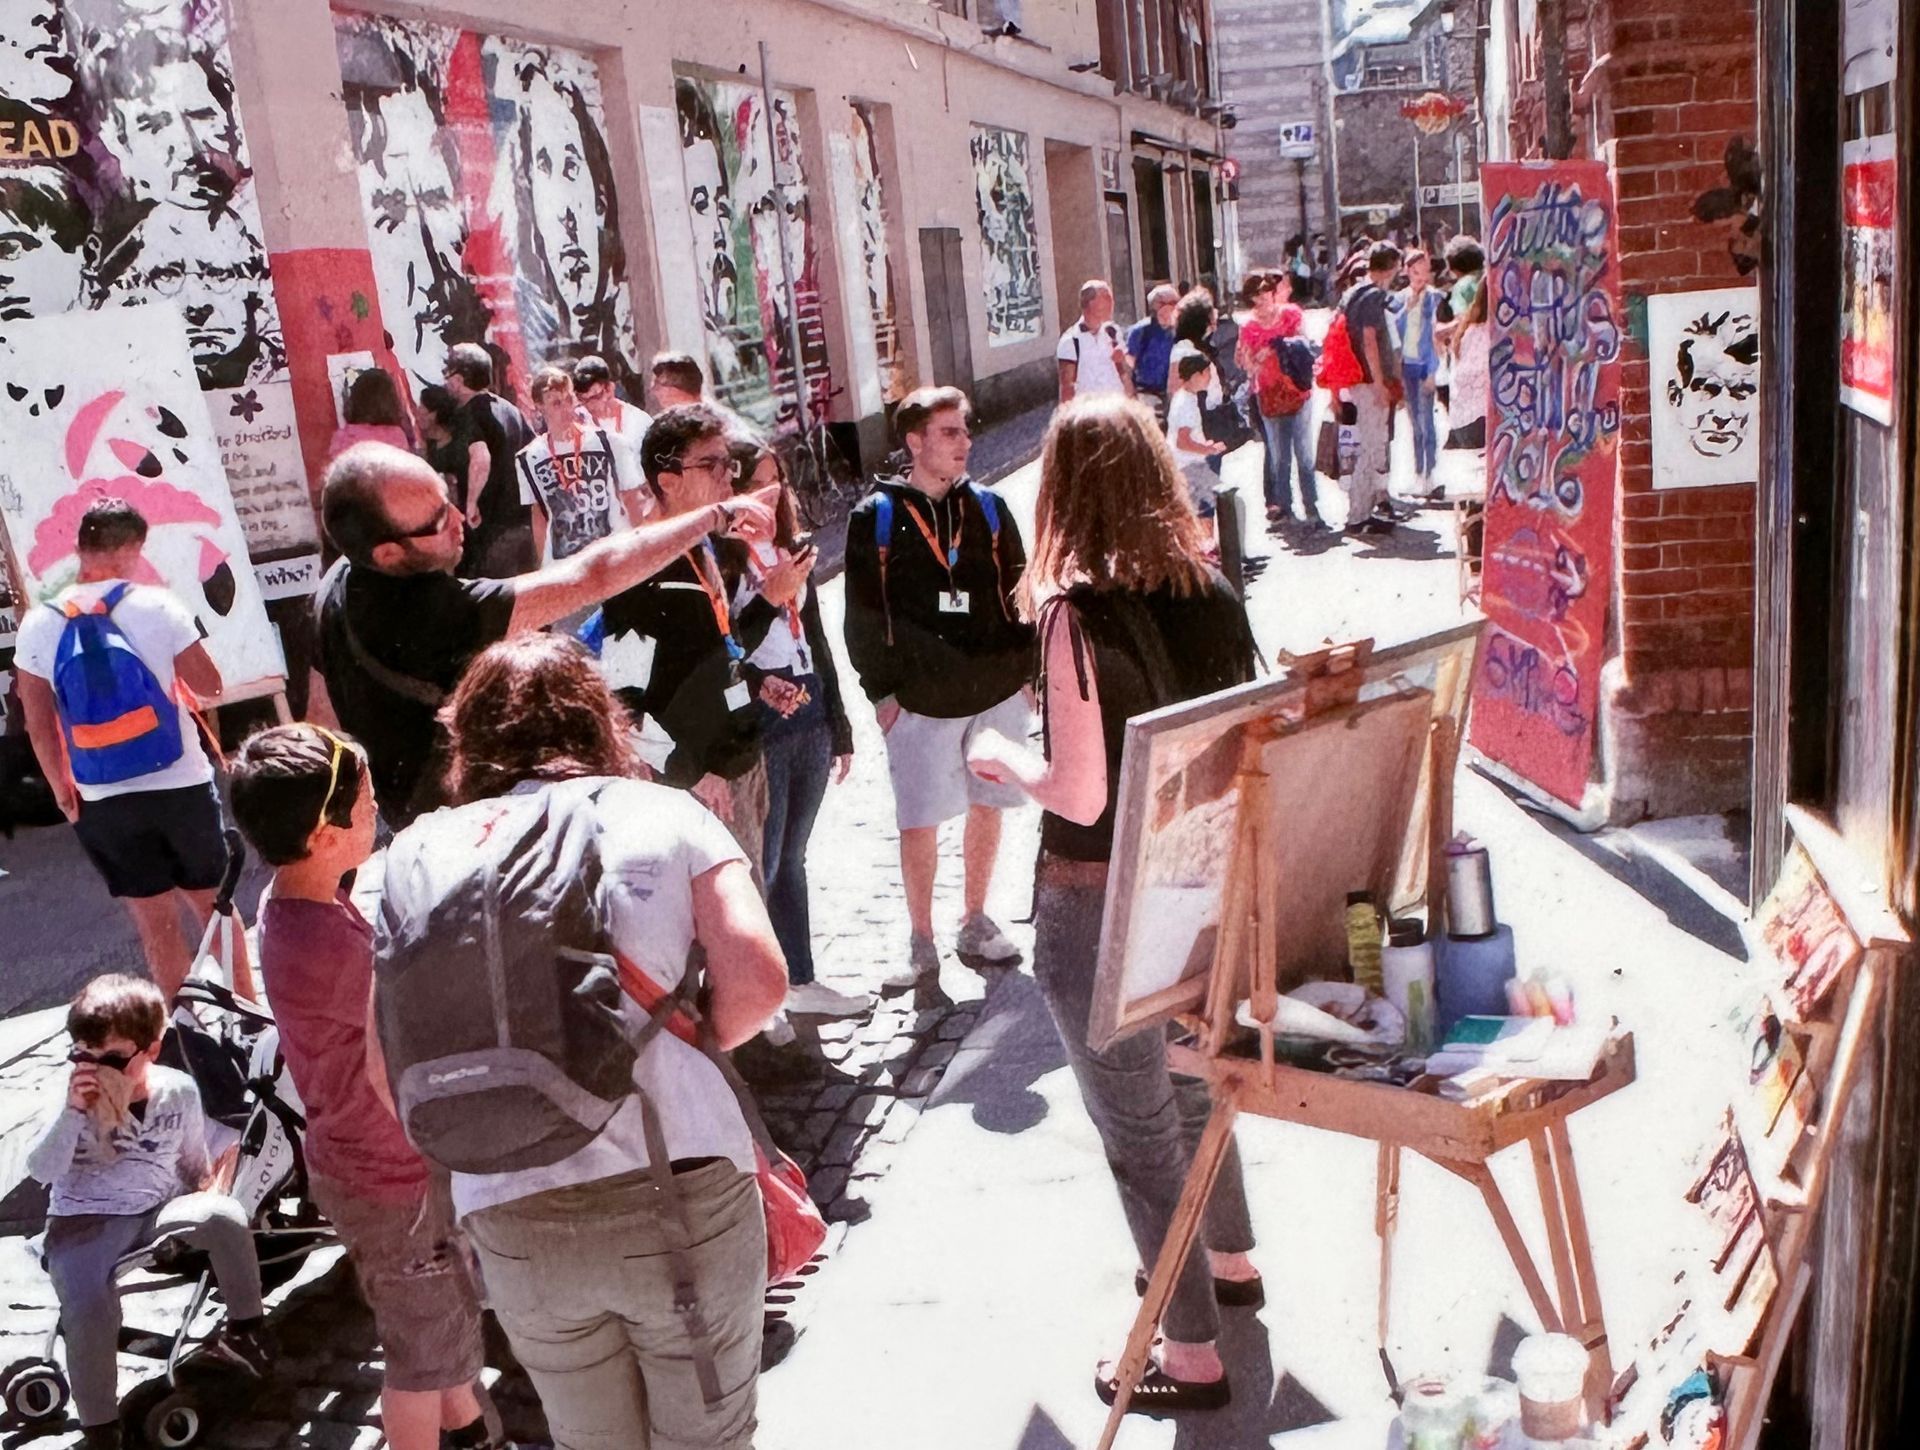 A vibrant street scene of people painting in the laneways of temple bar Dublin